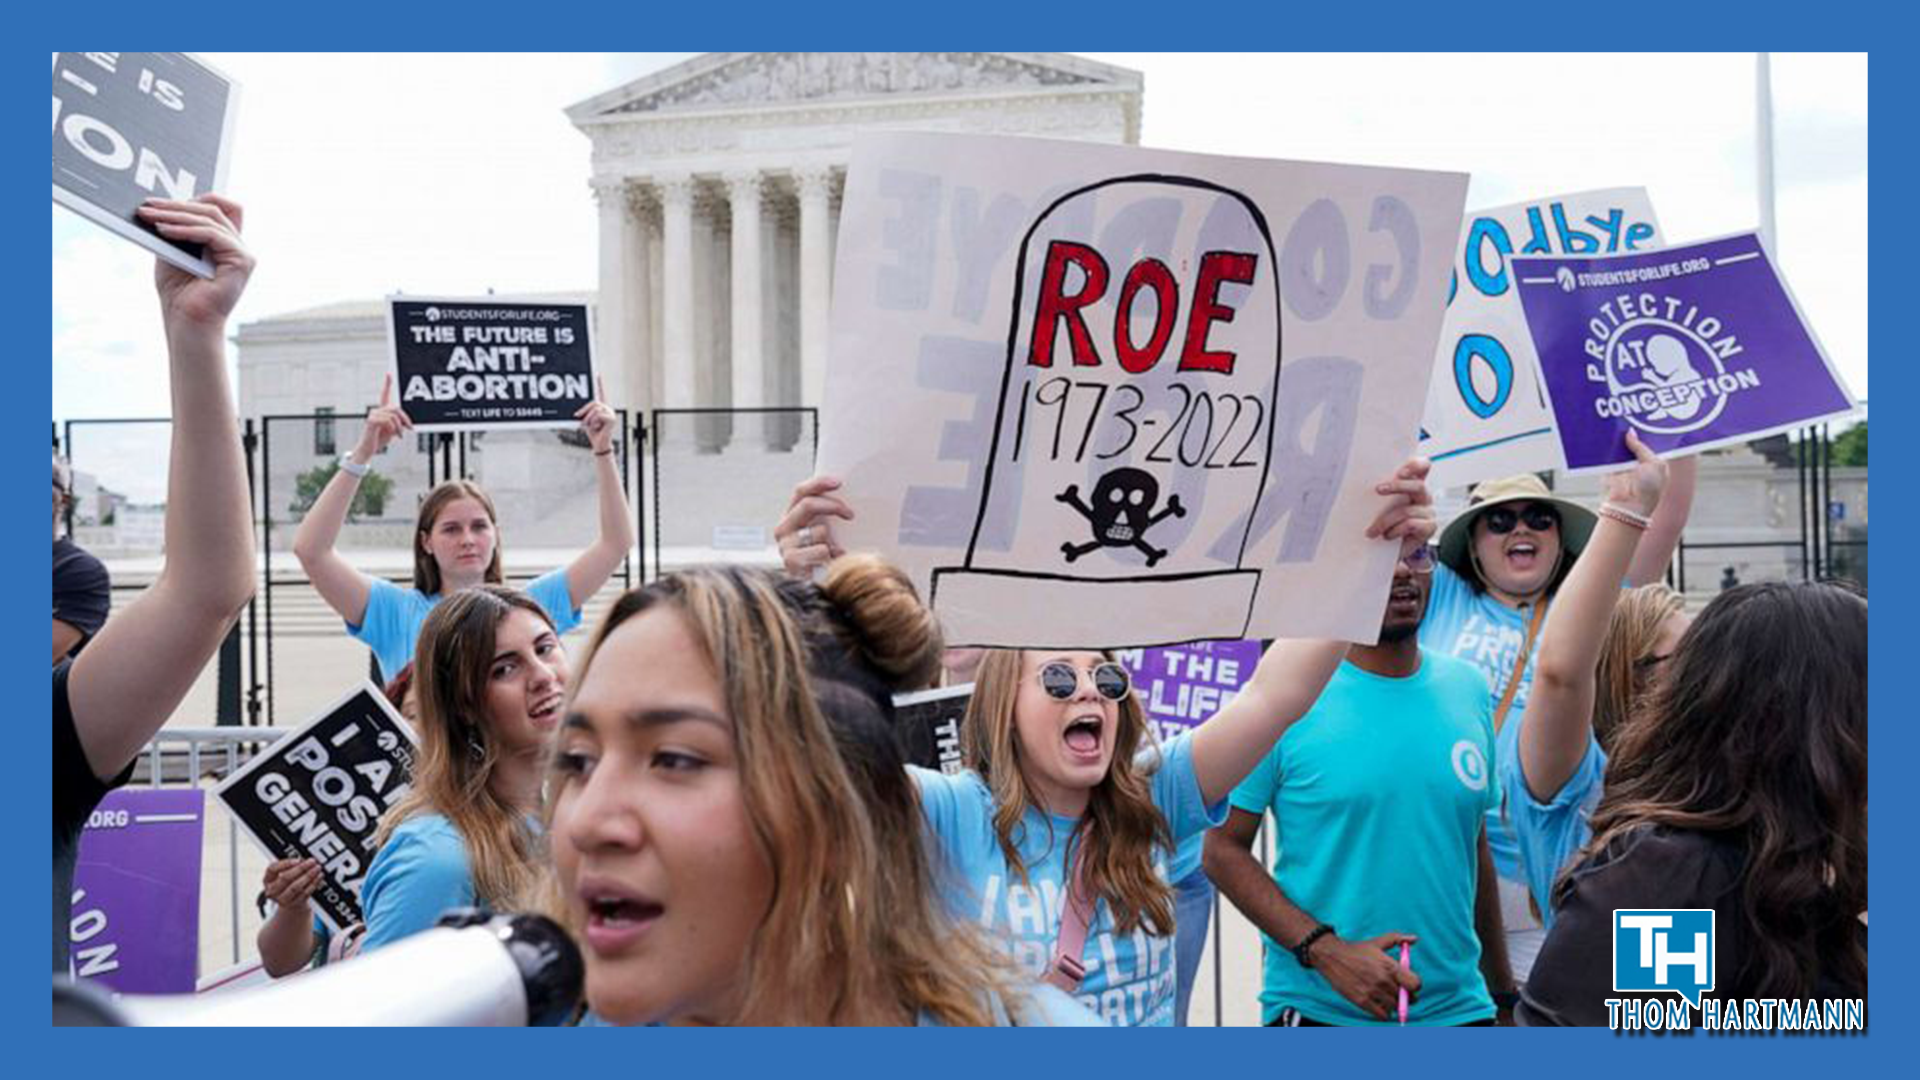 SCOTUS overturning Roe v Wade Isn't End of Abortion Rights